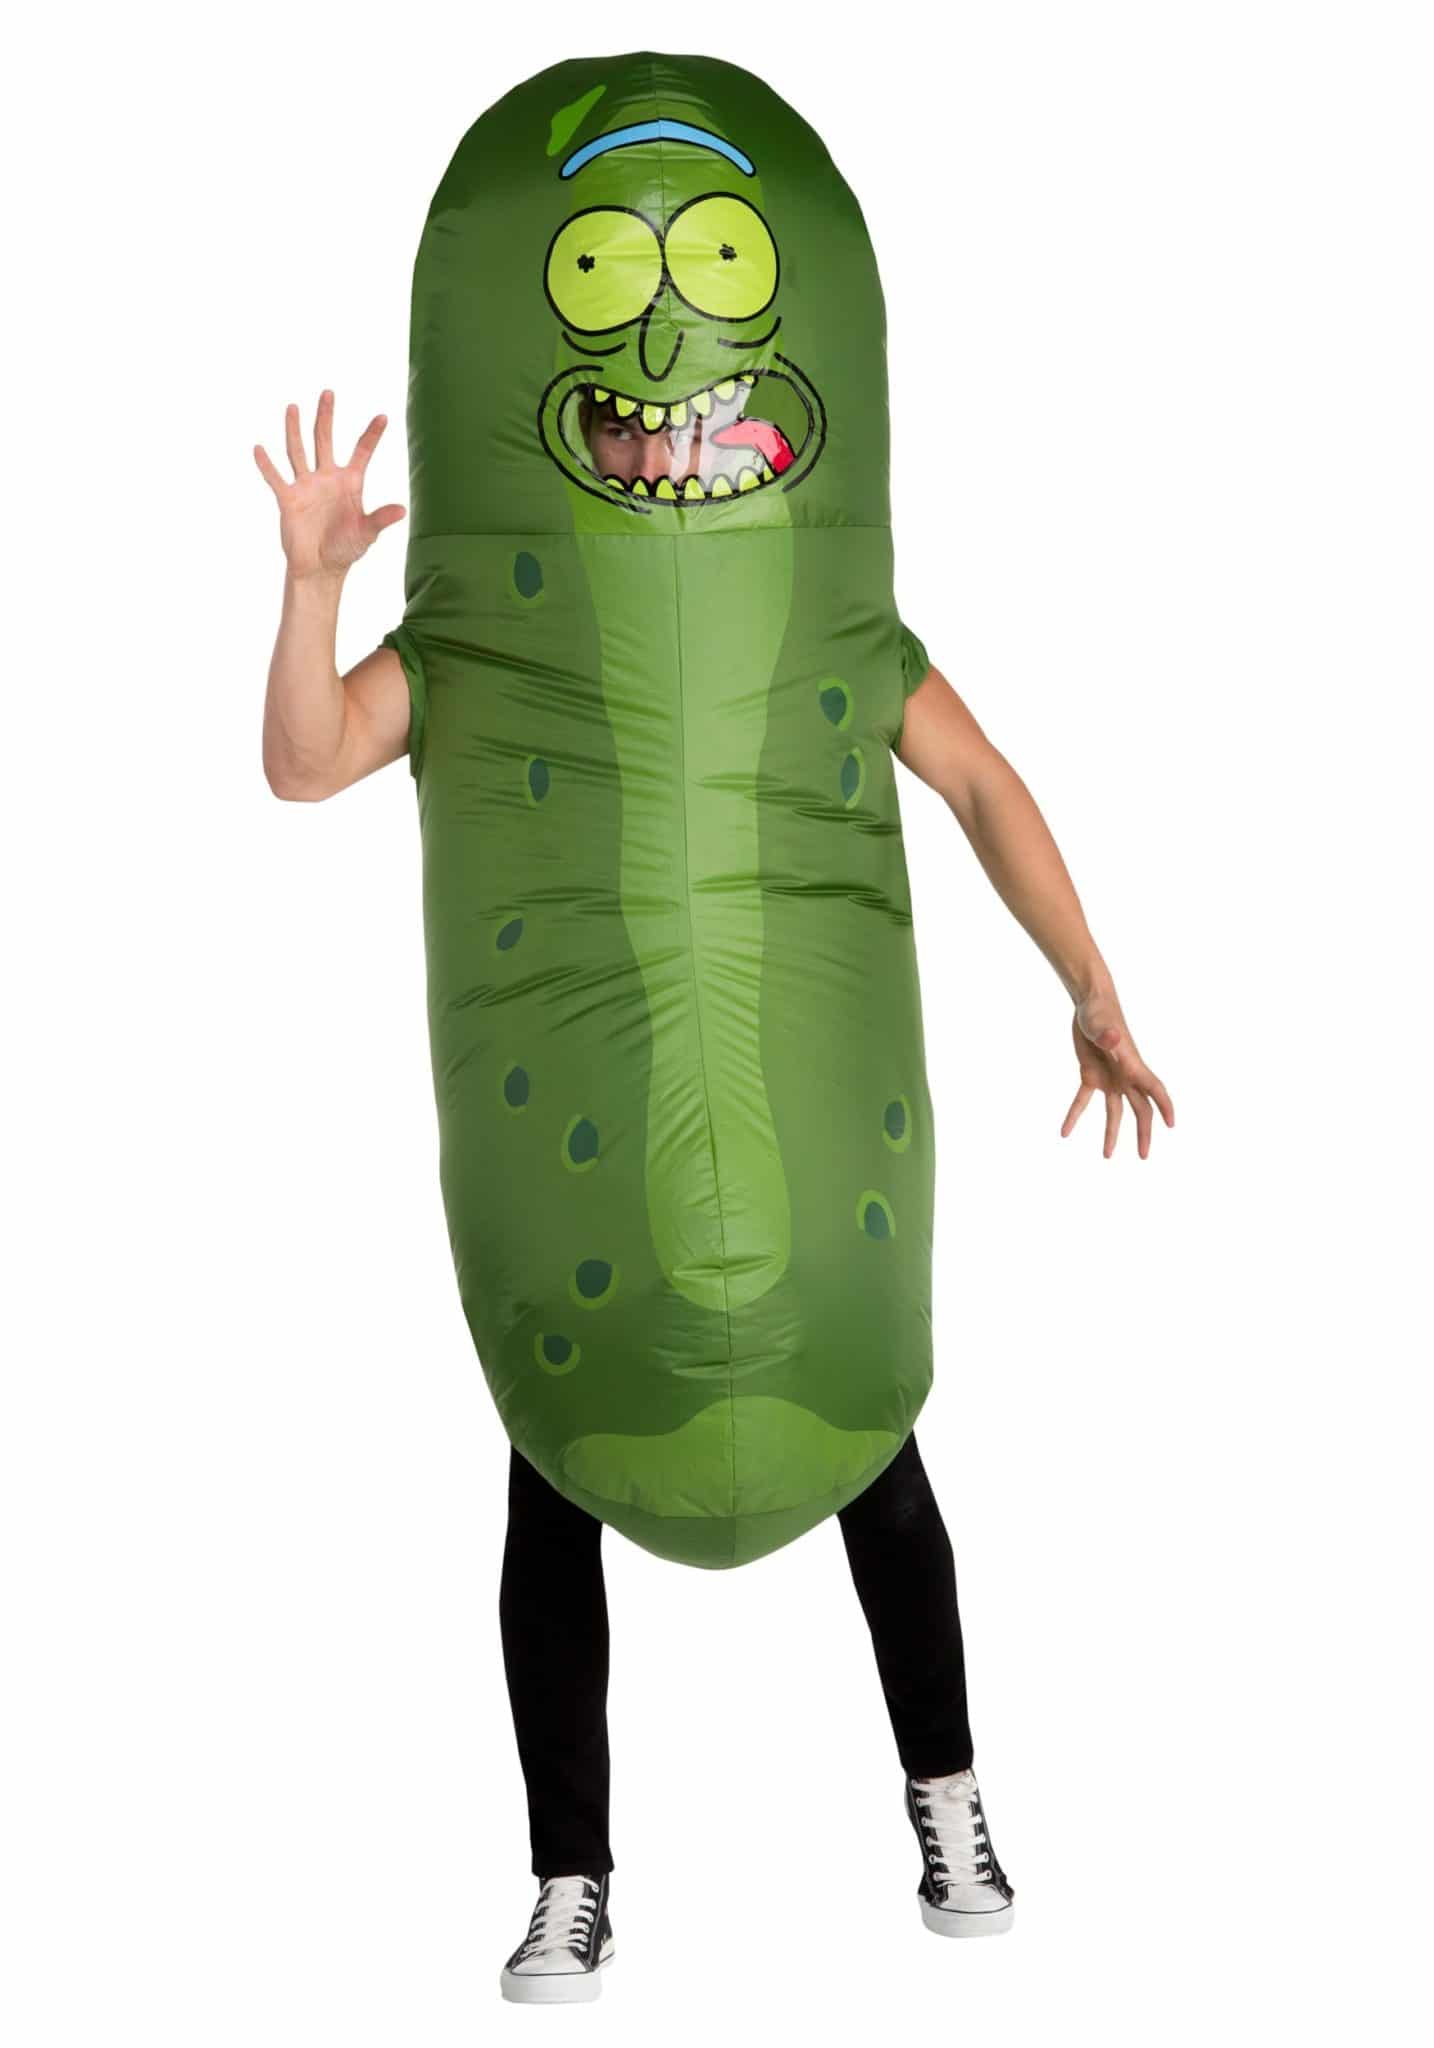 Funny Inflatable Costumes 2022: Pickle Rick for Halloween 2022